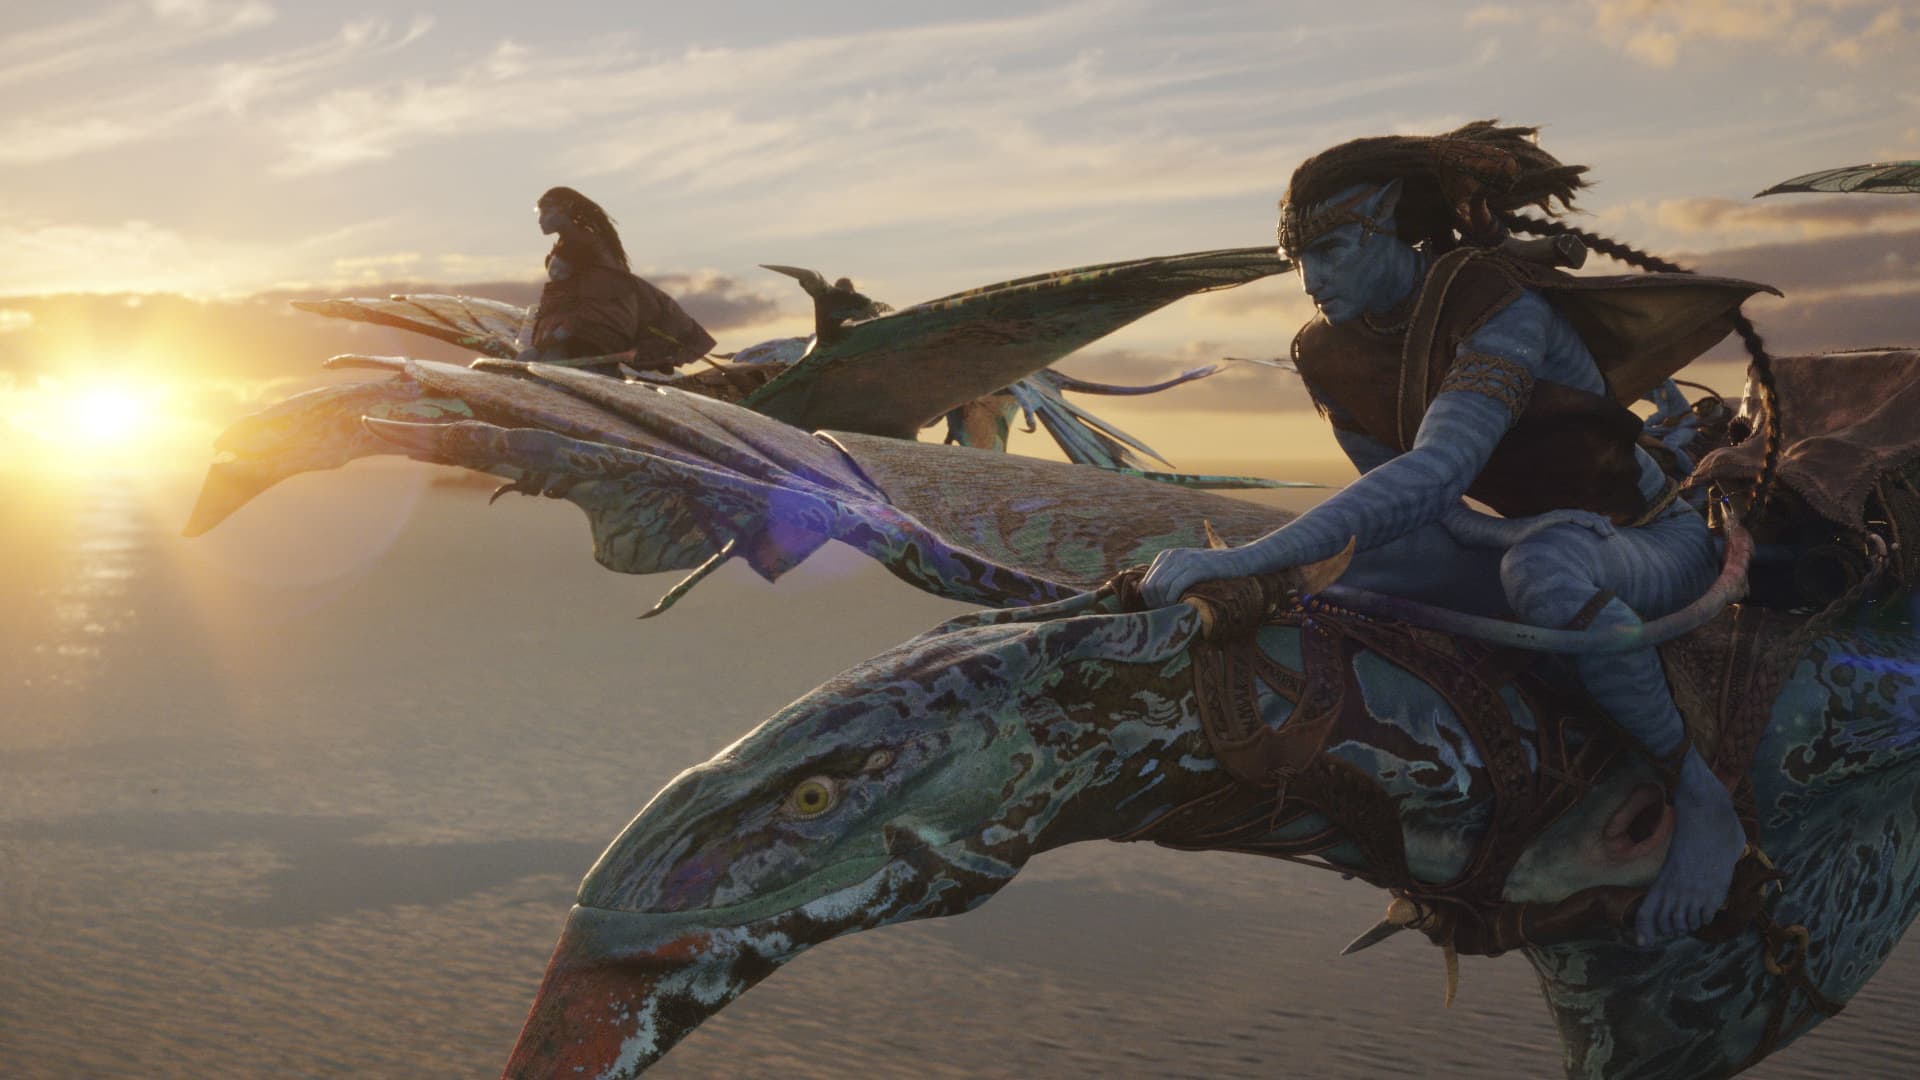 ‘Avatar: The Way of Water’ review roundup: See it on the biggest screen possible, critics say